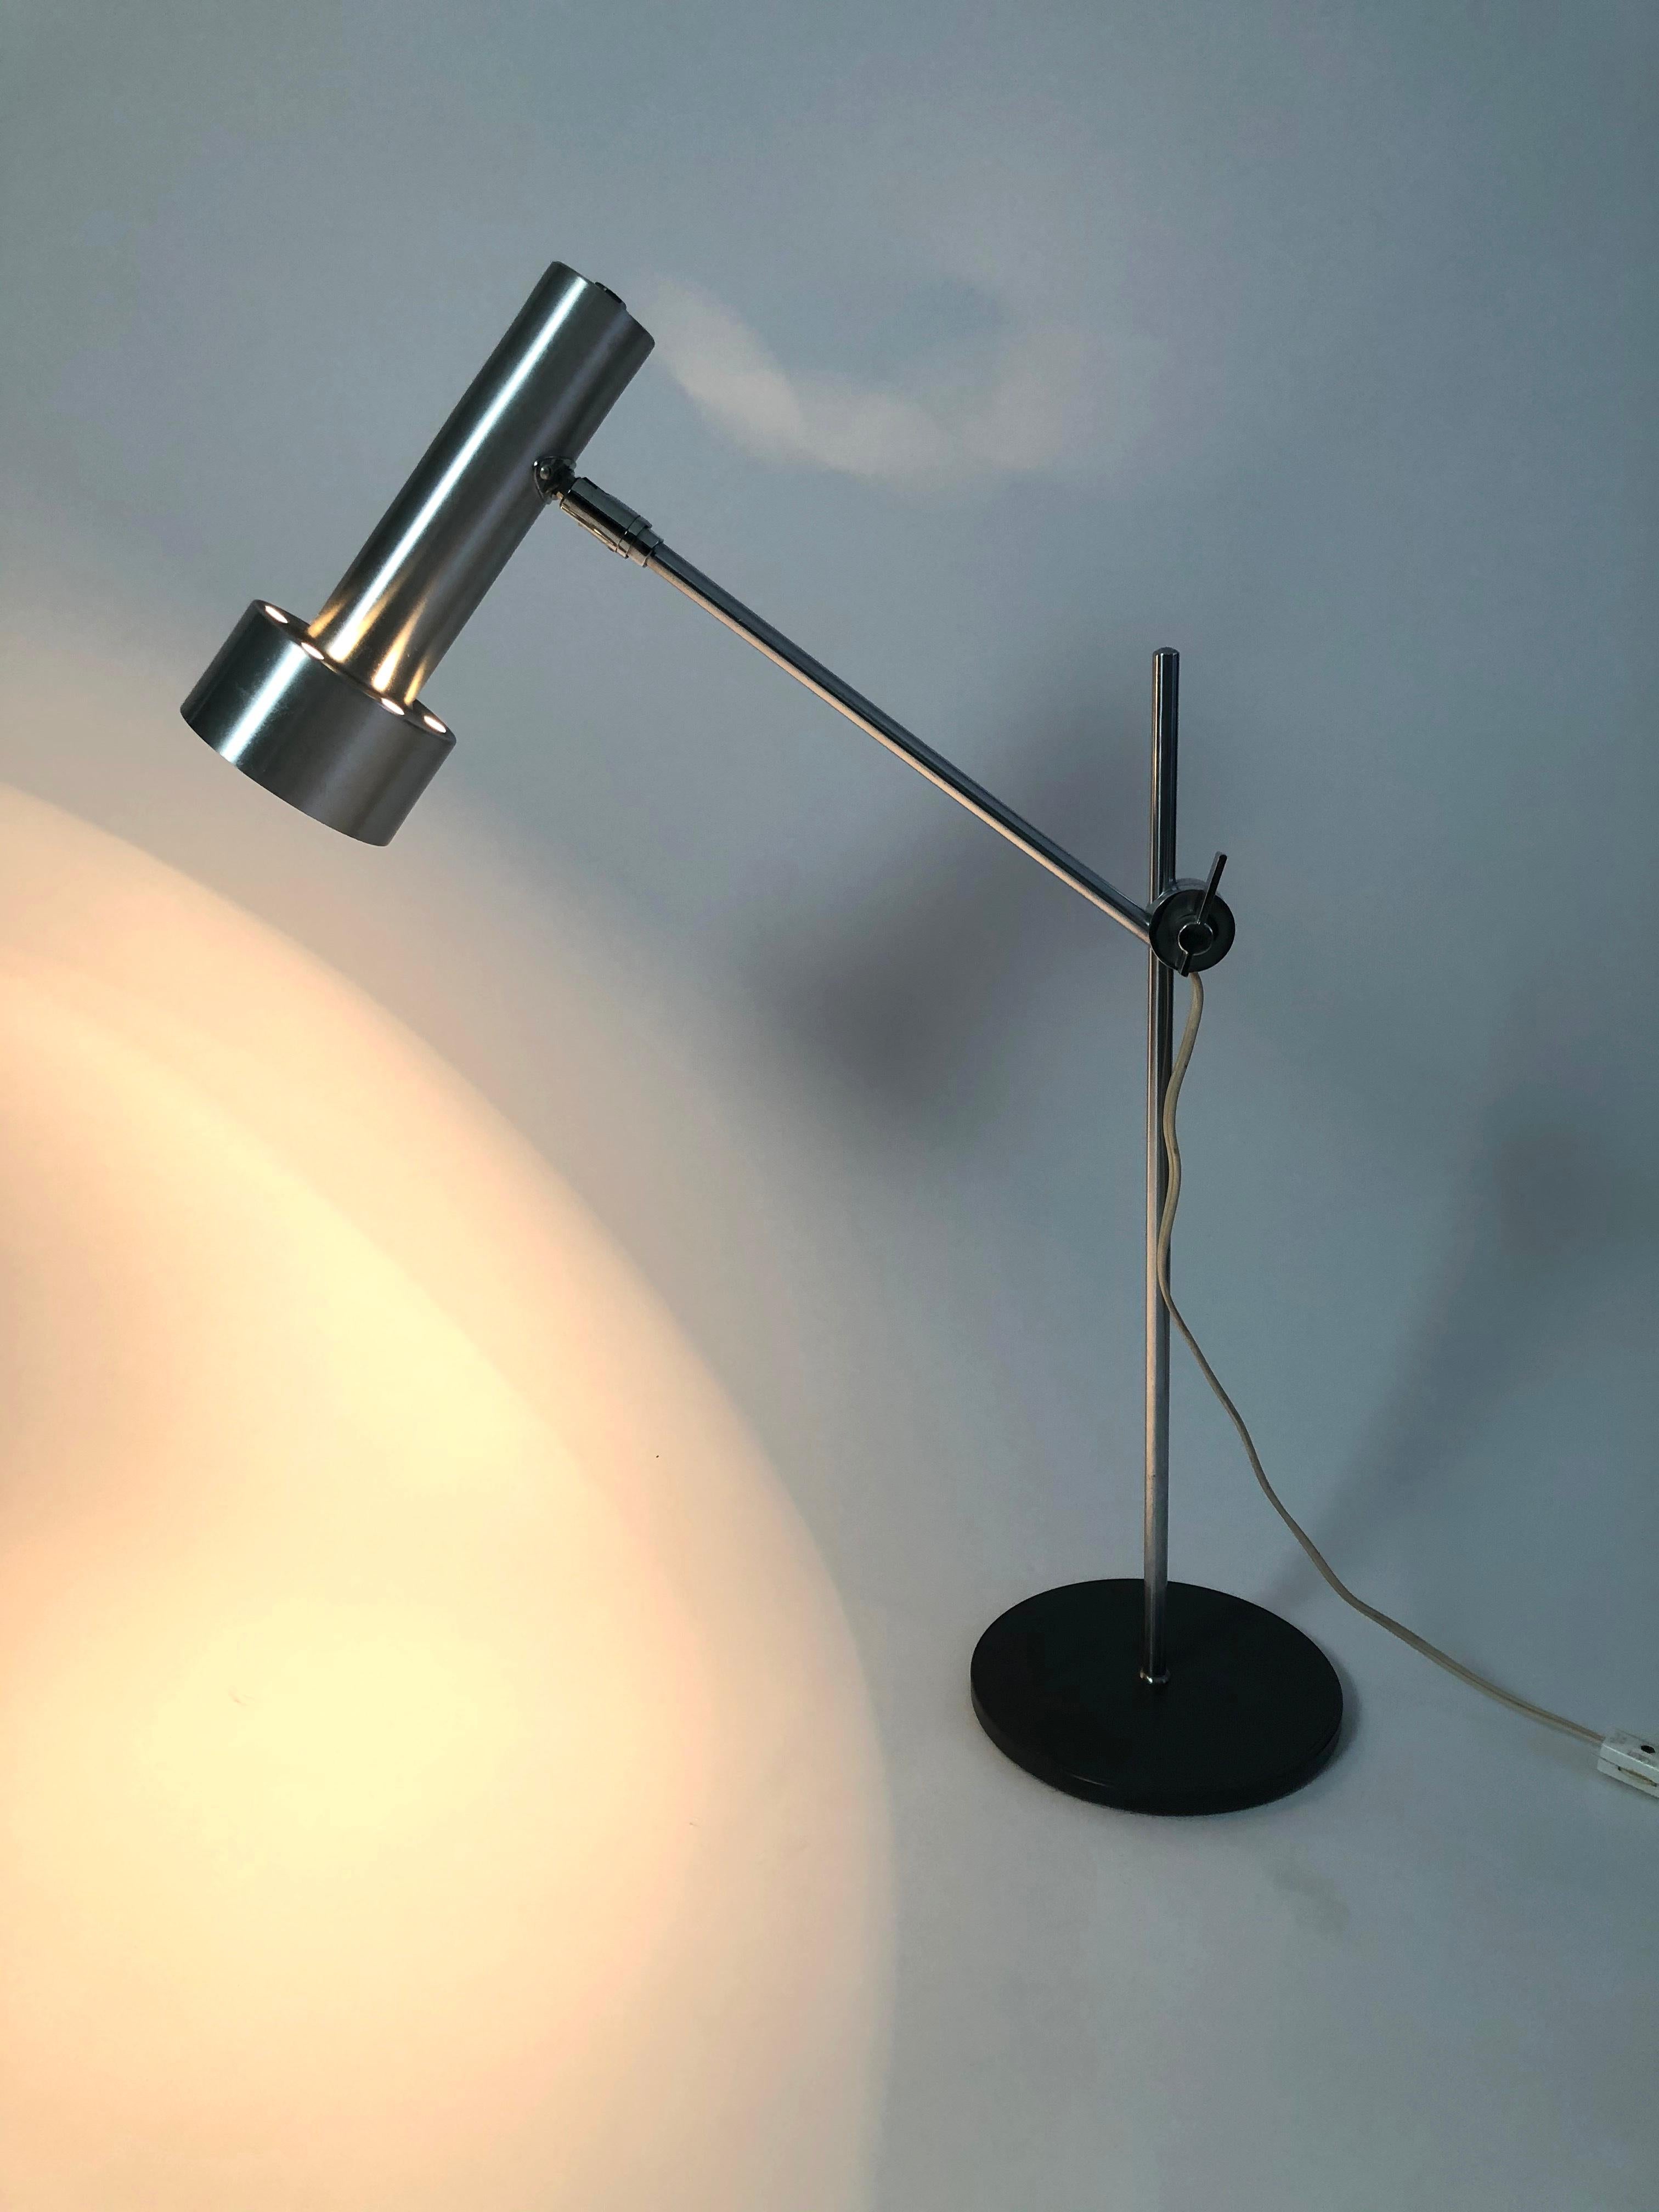 A Swedish adjustable height desk lamp, with cylindrical brushed steel shade on a chromed metal post with circular black metal base. The shade can be moved up and down the post to the desired height and the shade can be easily angled to a wide range